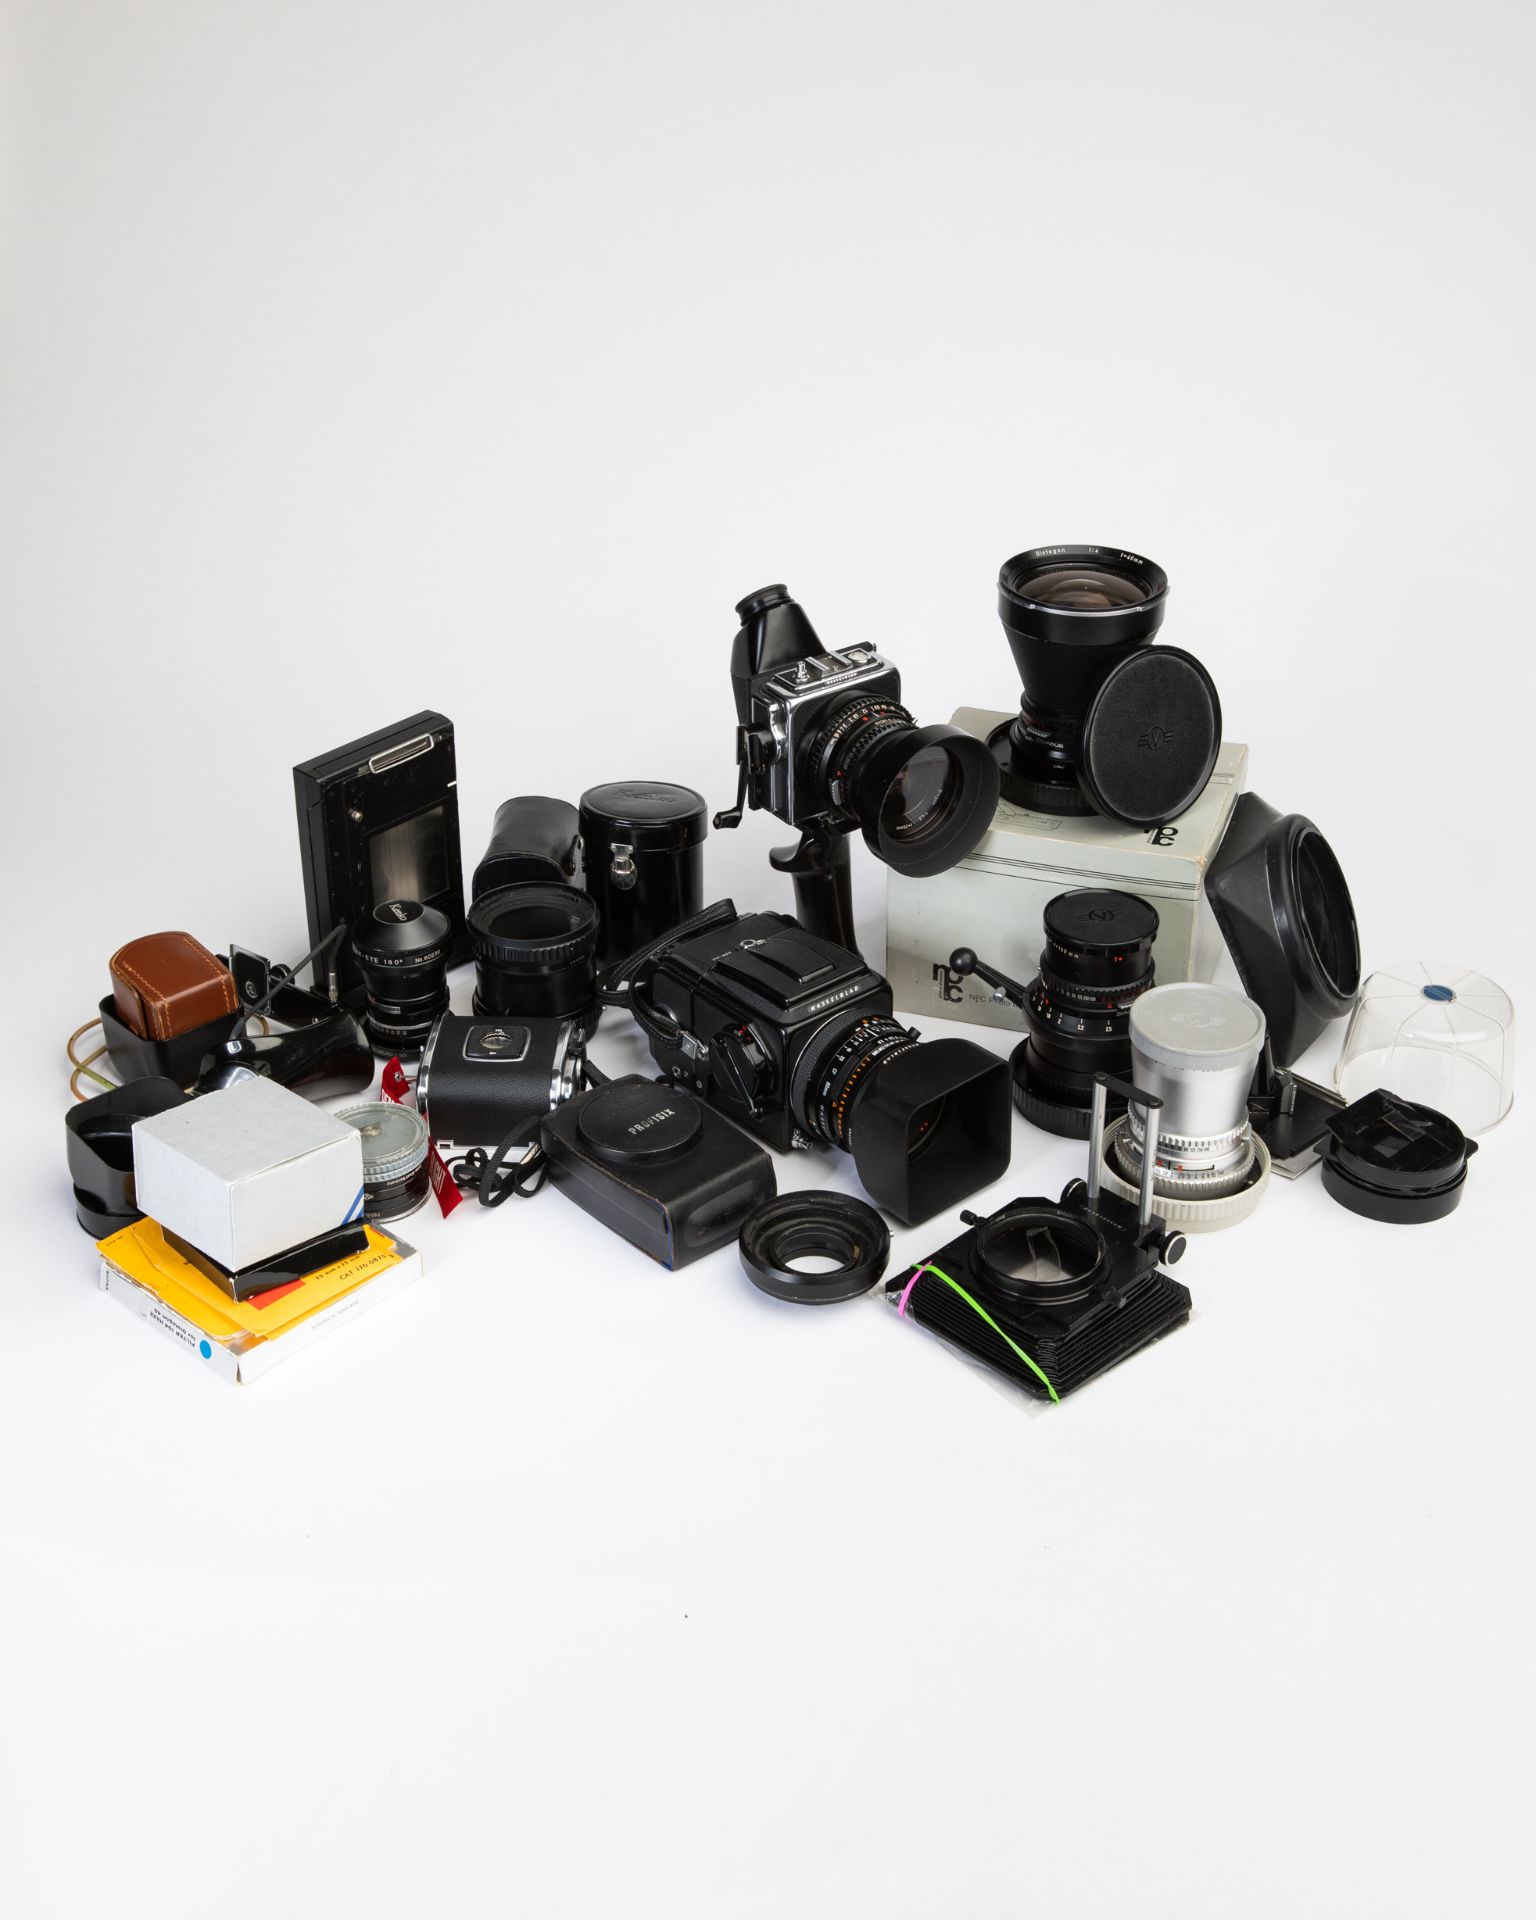 Hasselblad Cameras and Equipment, Mixed Lot